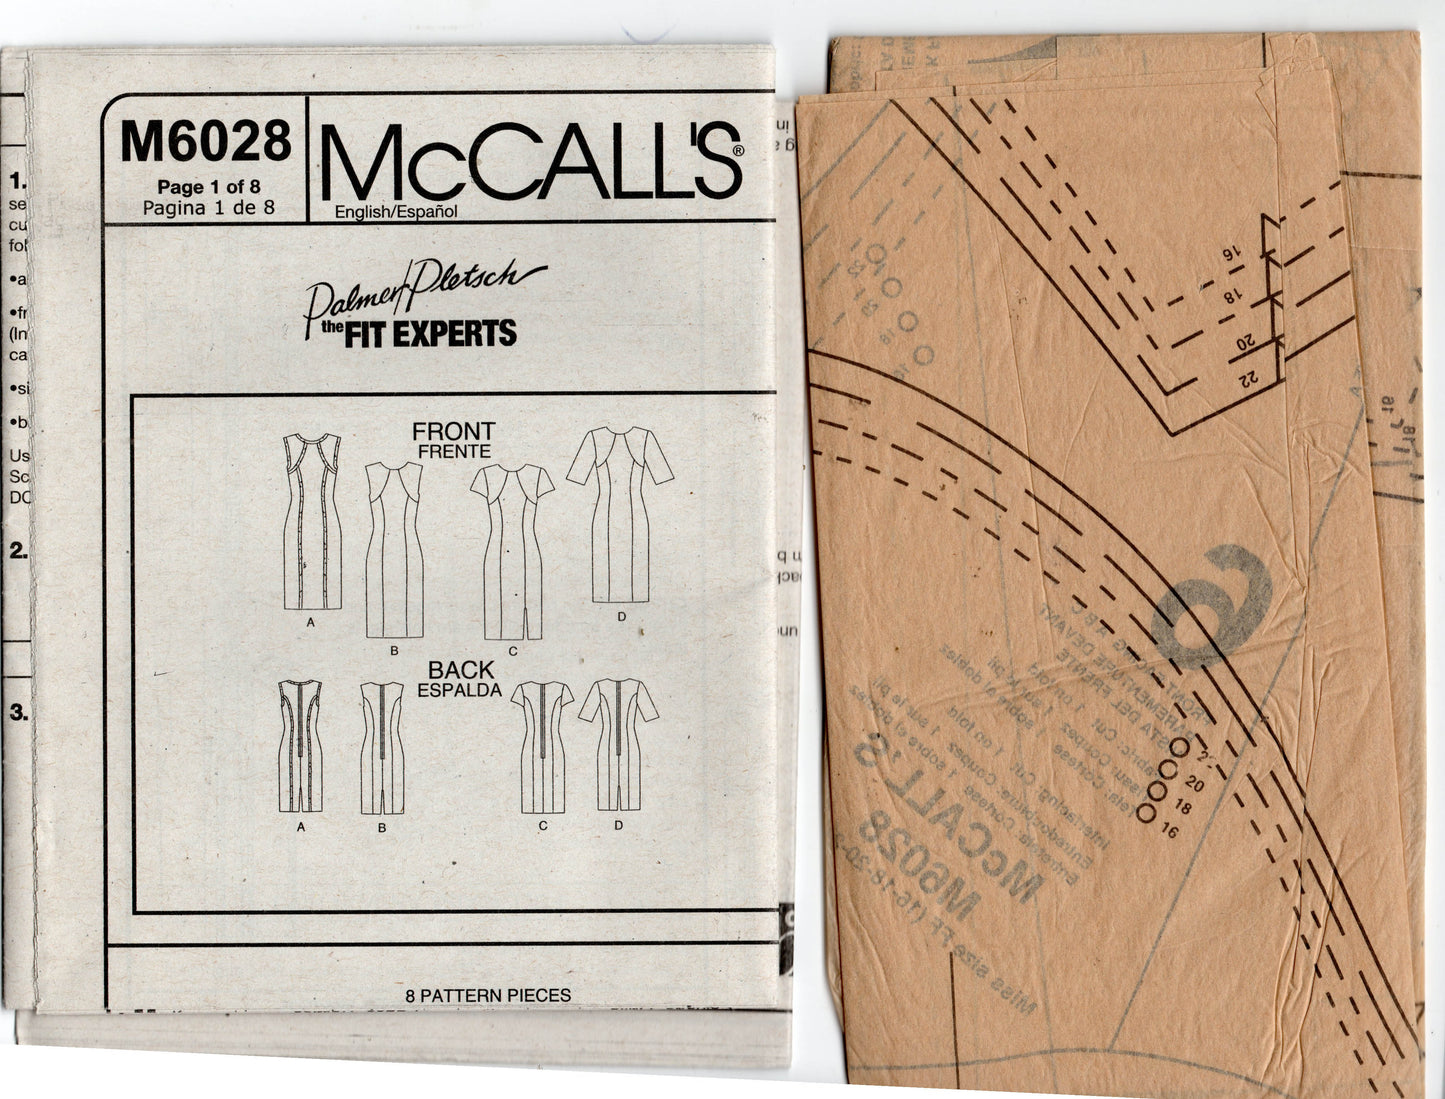 McCall's M6028 PALMER PLETSCH Womens Perfect Fit Princess Seamed Sheath Dress Out Of Print Sewing Pattern Sizes 16 - 22 UNCUT Factory Folded